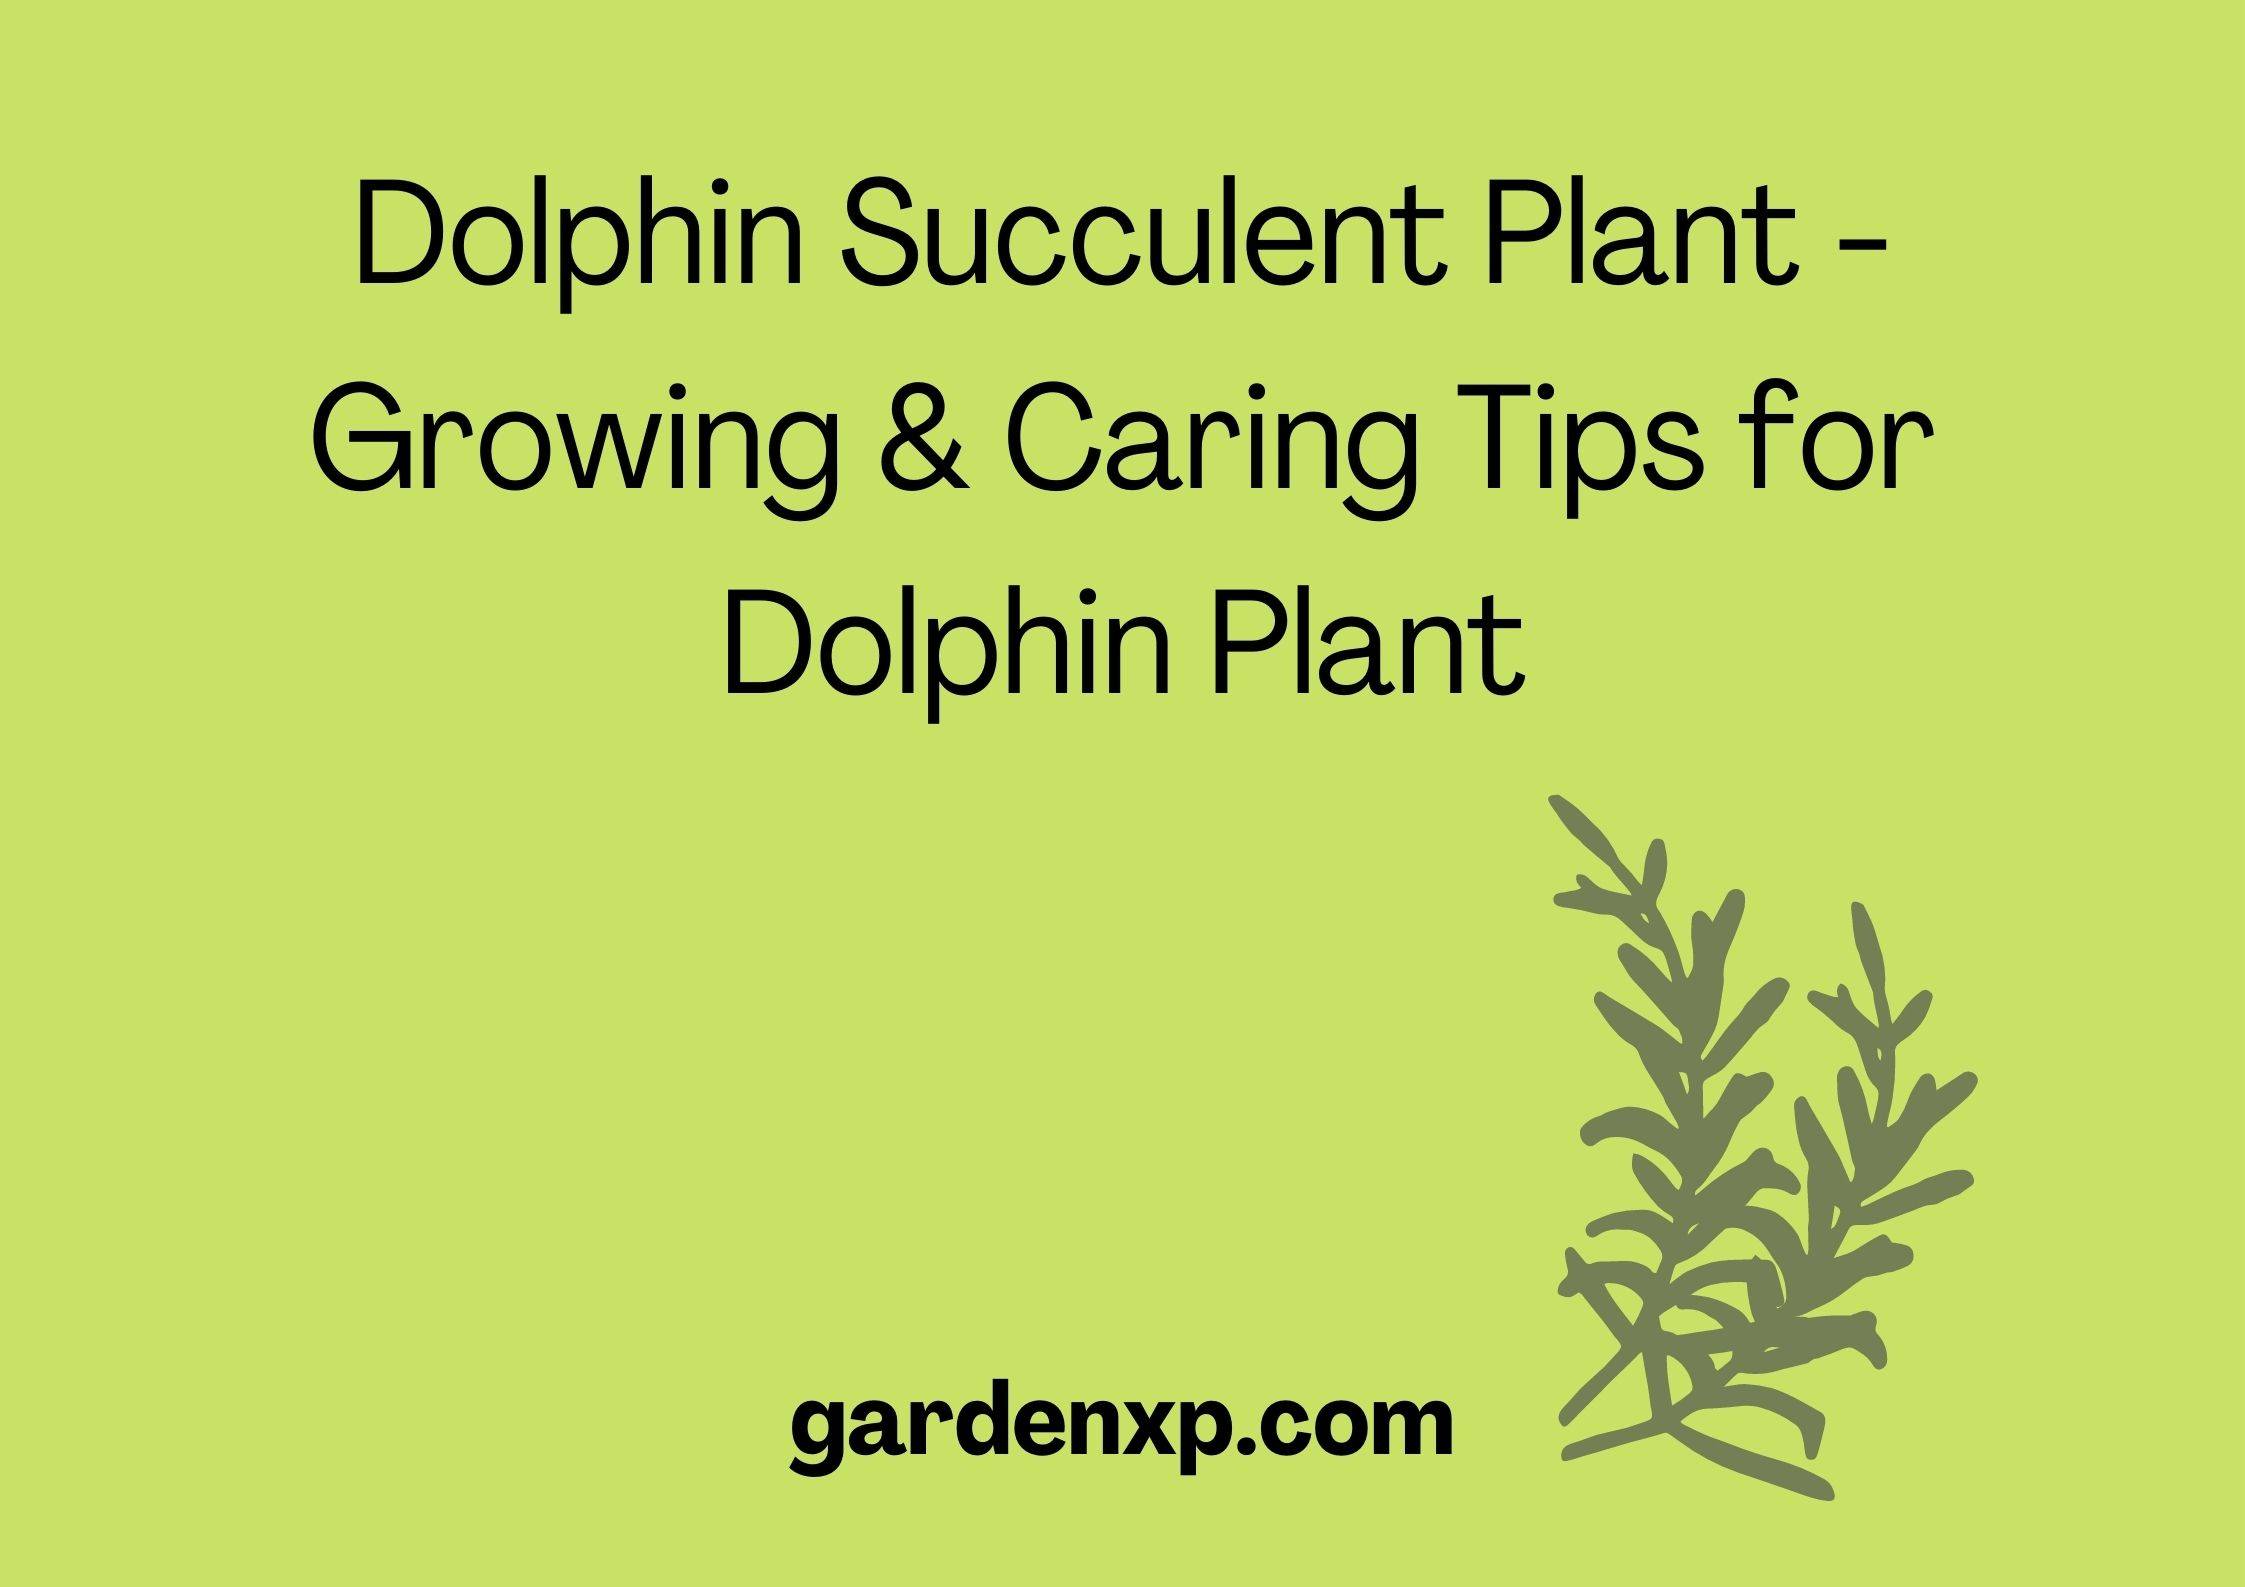 Dolphin Succulent Plant - Growing and Caring Tips for Dolphin Plant